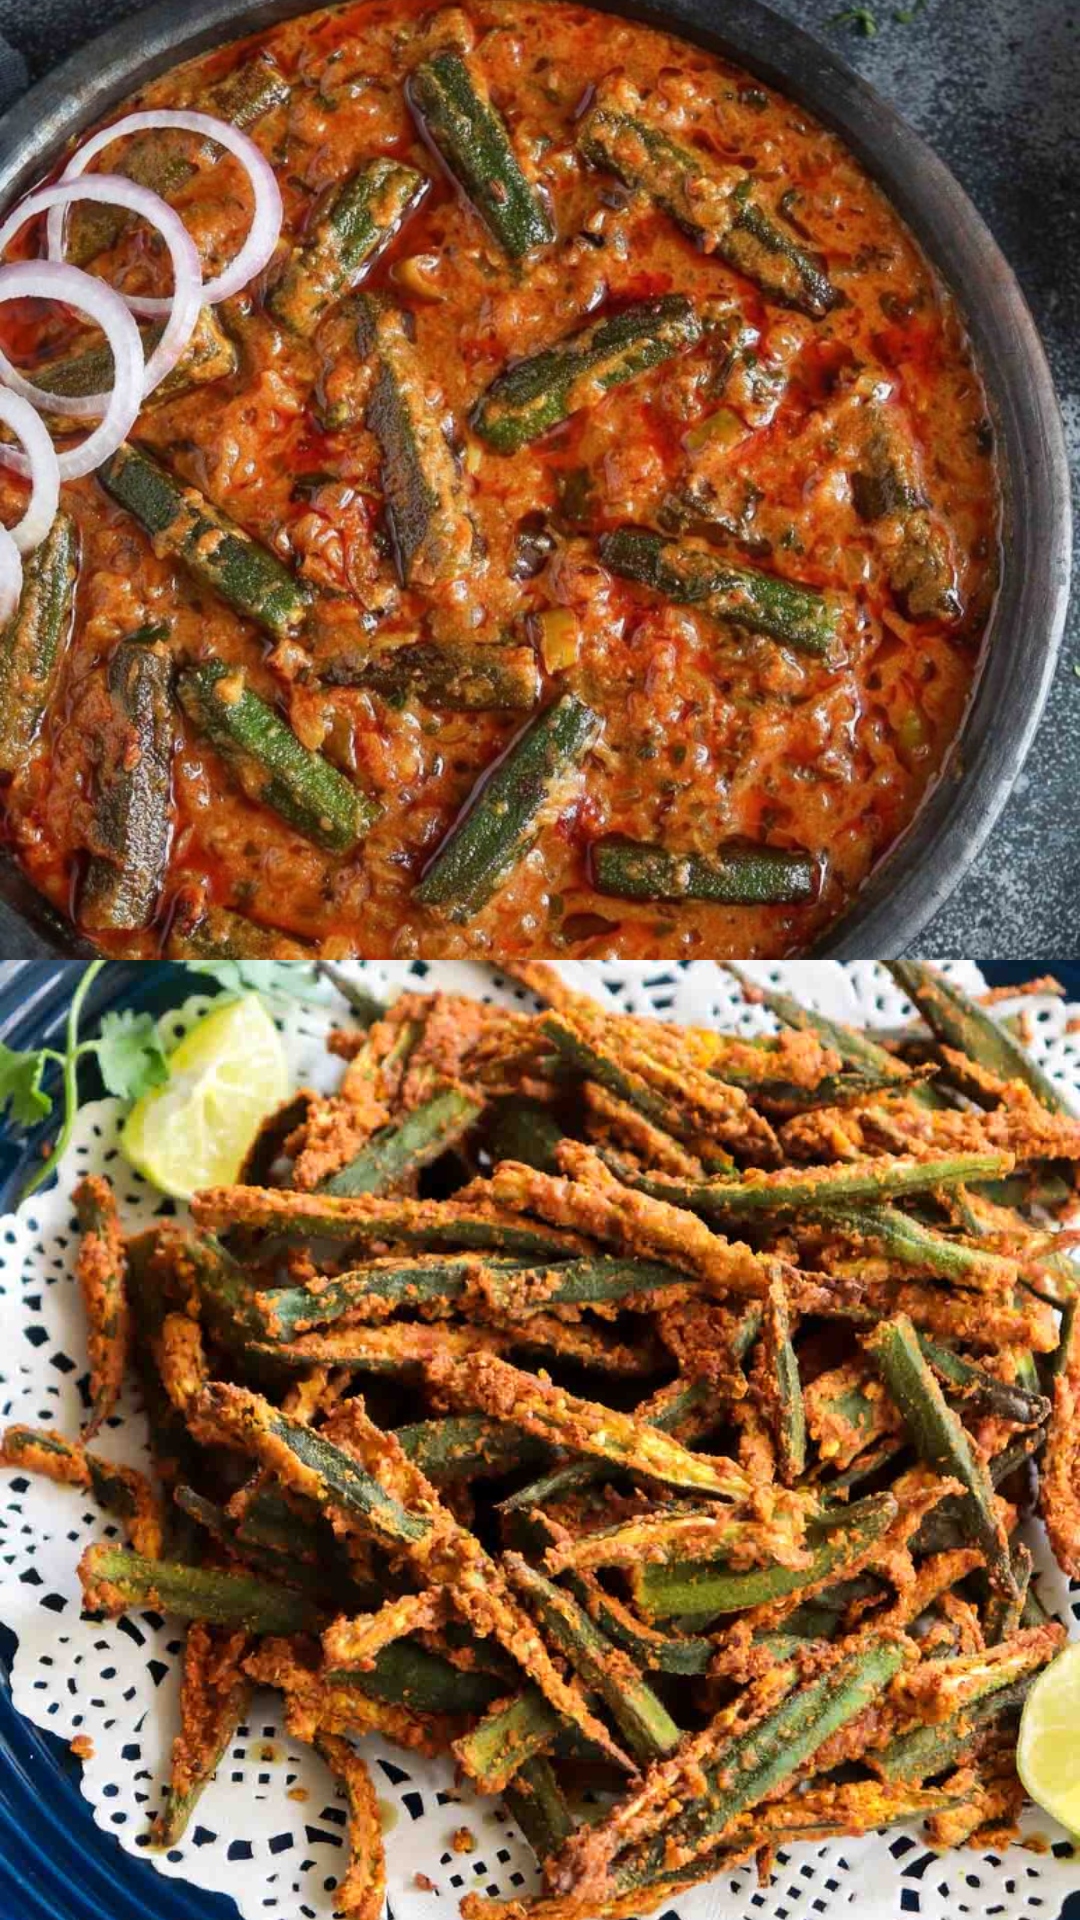 5 delicious Bhindi recipes to try this summer